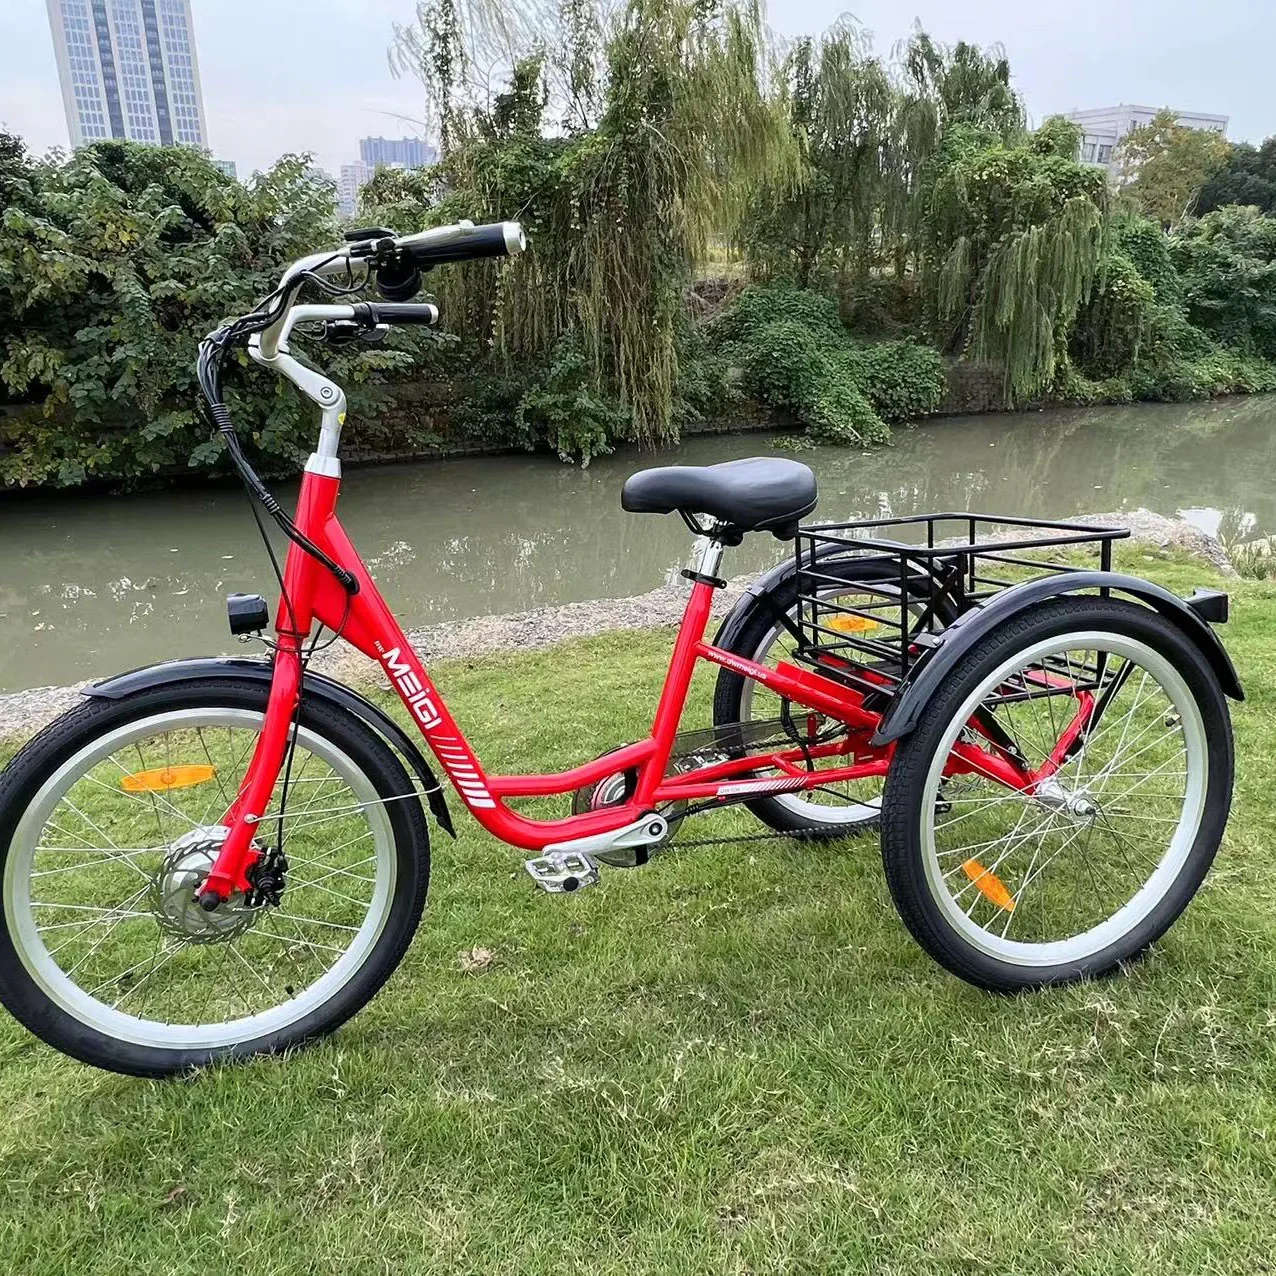 MEIGI Good Quality Urban E Tricycle  350W Motor Cargo Delivery Ebike 3 Wheel Electric Tricycle For Adults custom meigi good quality urban e tricycle 350w motor cargo delivery ebike 3 wheel electric tricycle for adults custom